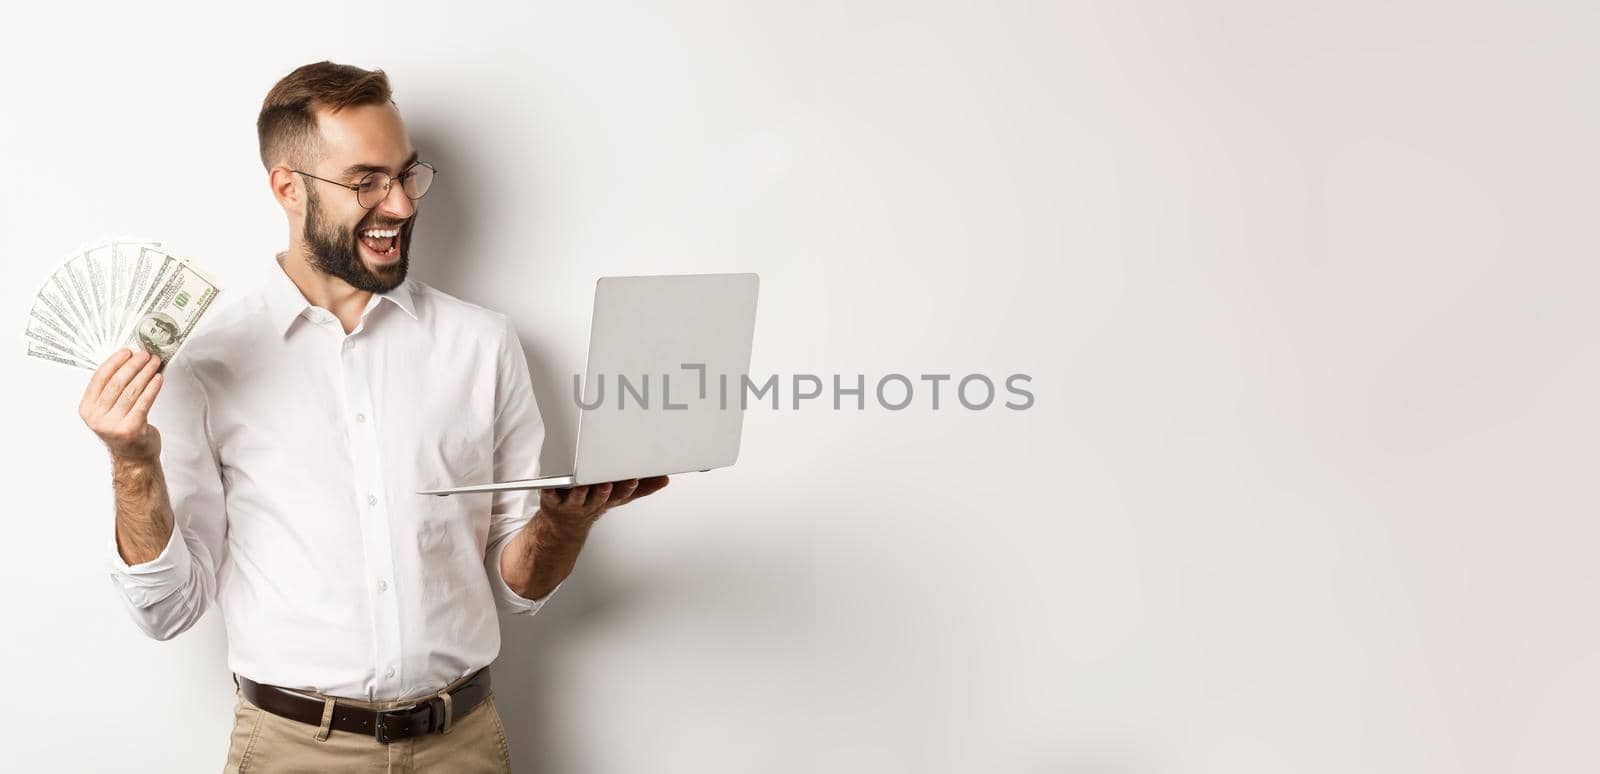 Business and e-commerce. Satisfied businessman doing job on laptop and holding money, smiling happy, standing over white background.